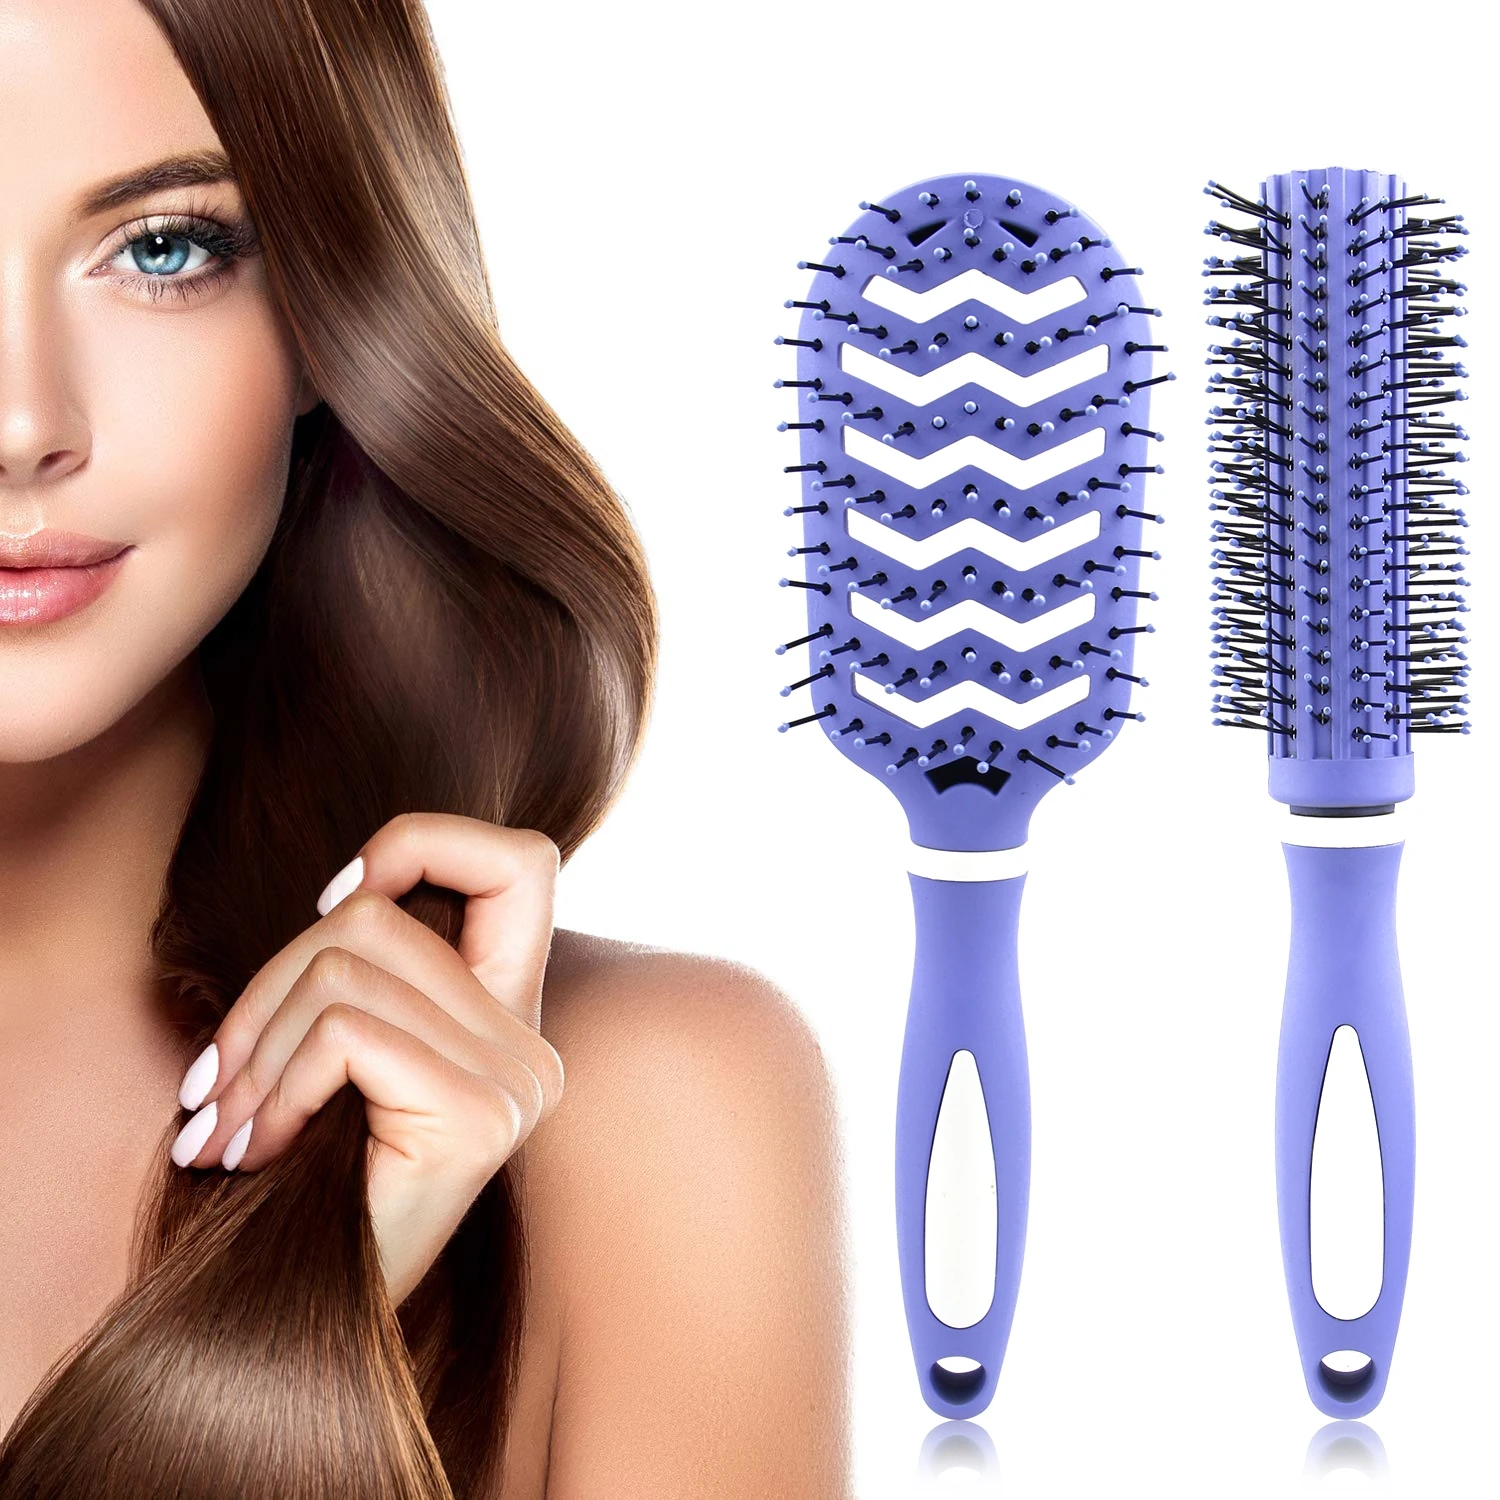 2020 New Style Profession Hair Brushes Massage Comb Curly Hair Comb Set Plastic Hair Styling Comb